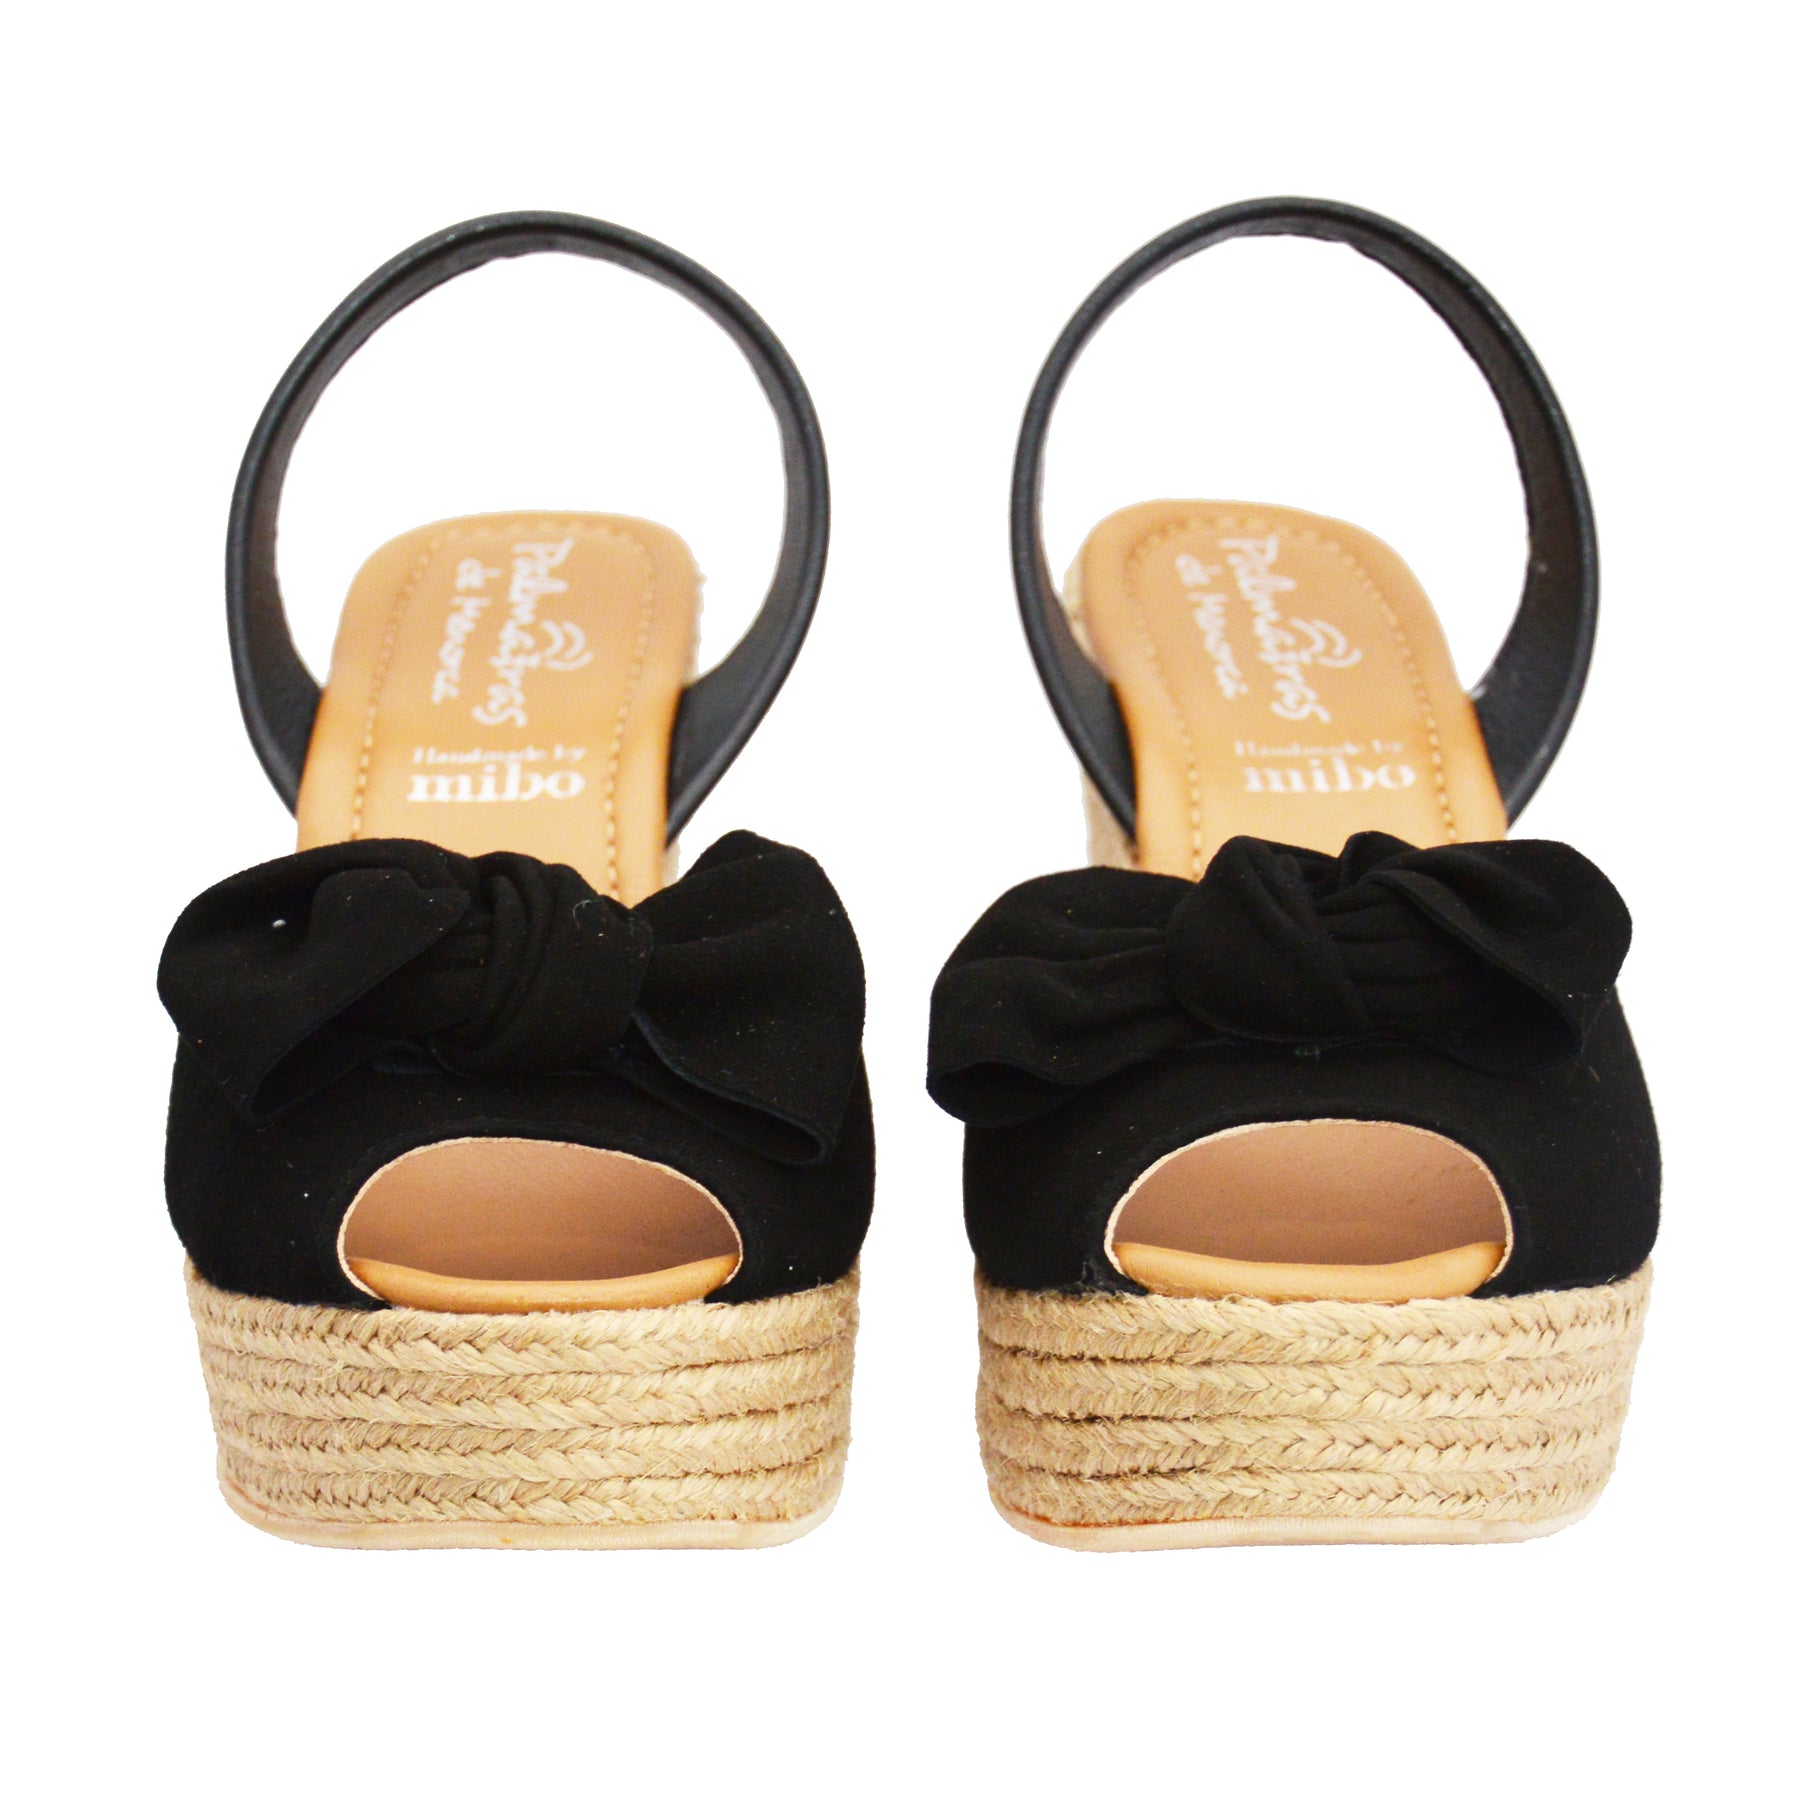 Mid Height Espadrille Wedge Avarca Slingback Sandals in Black Suede with Bow Embellishment